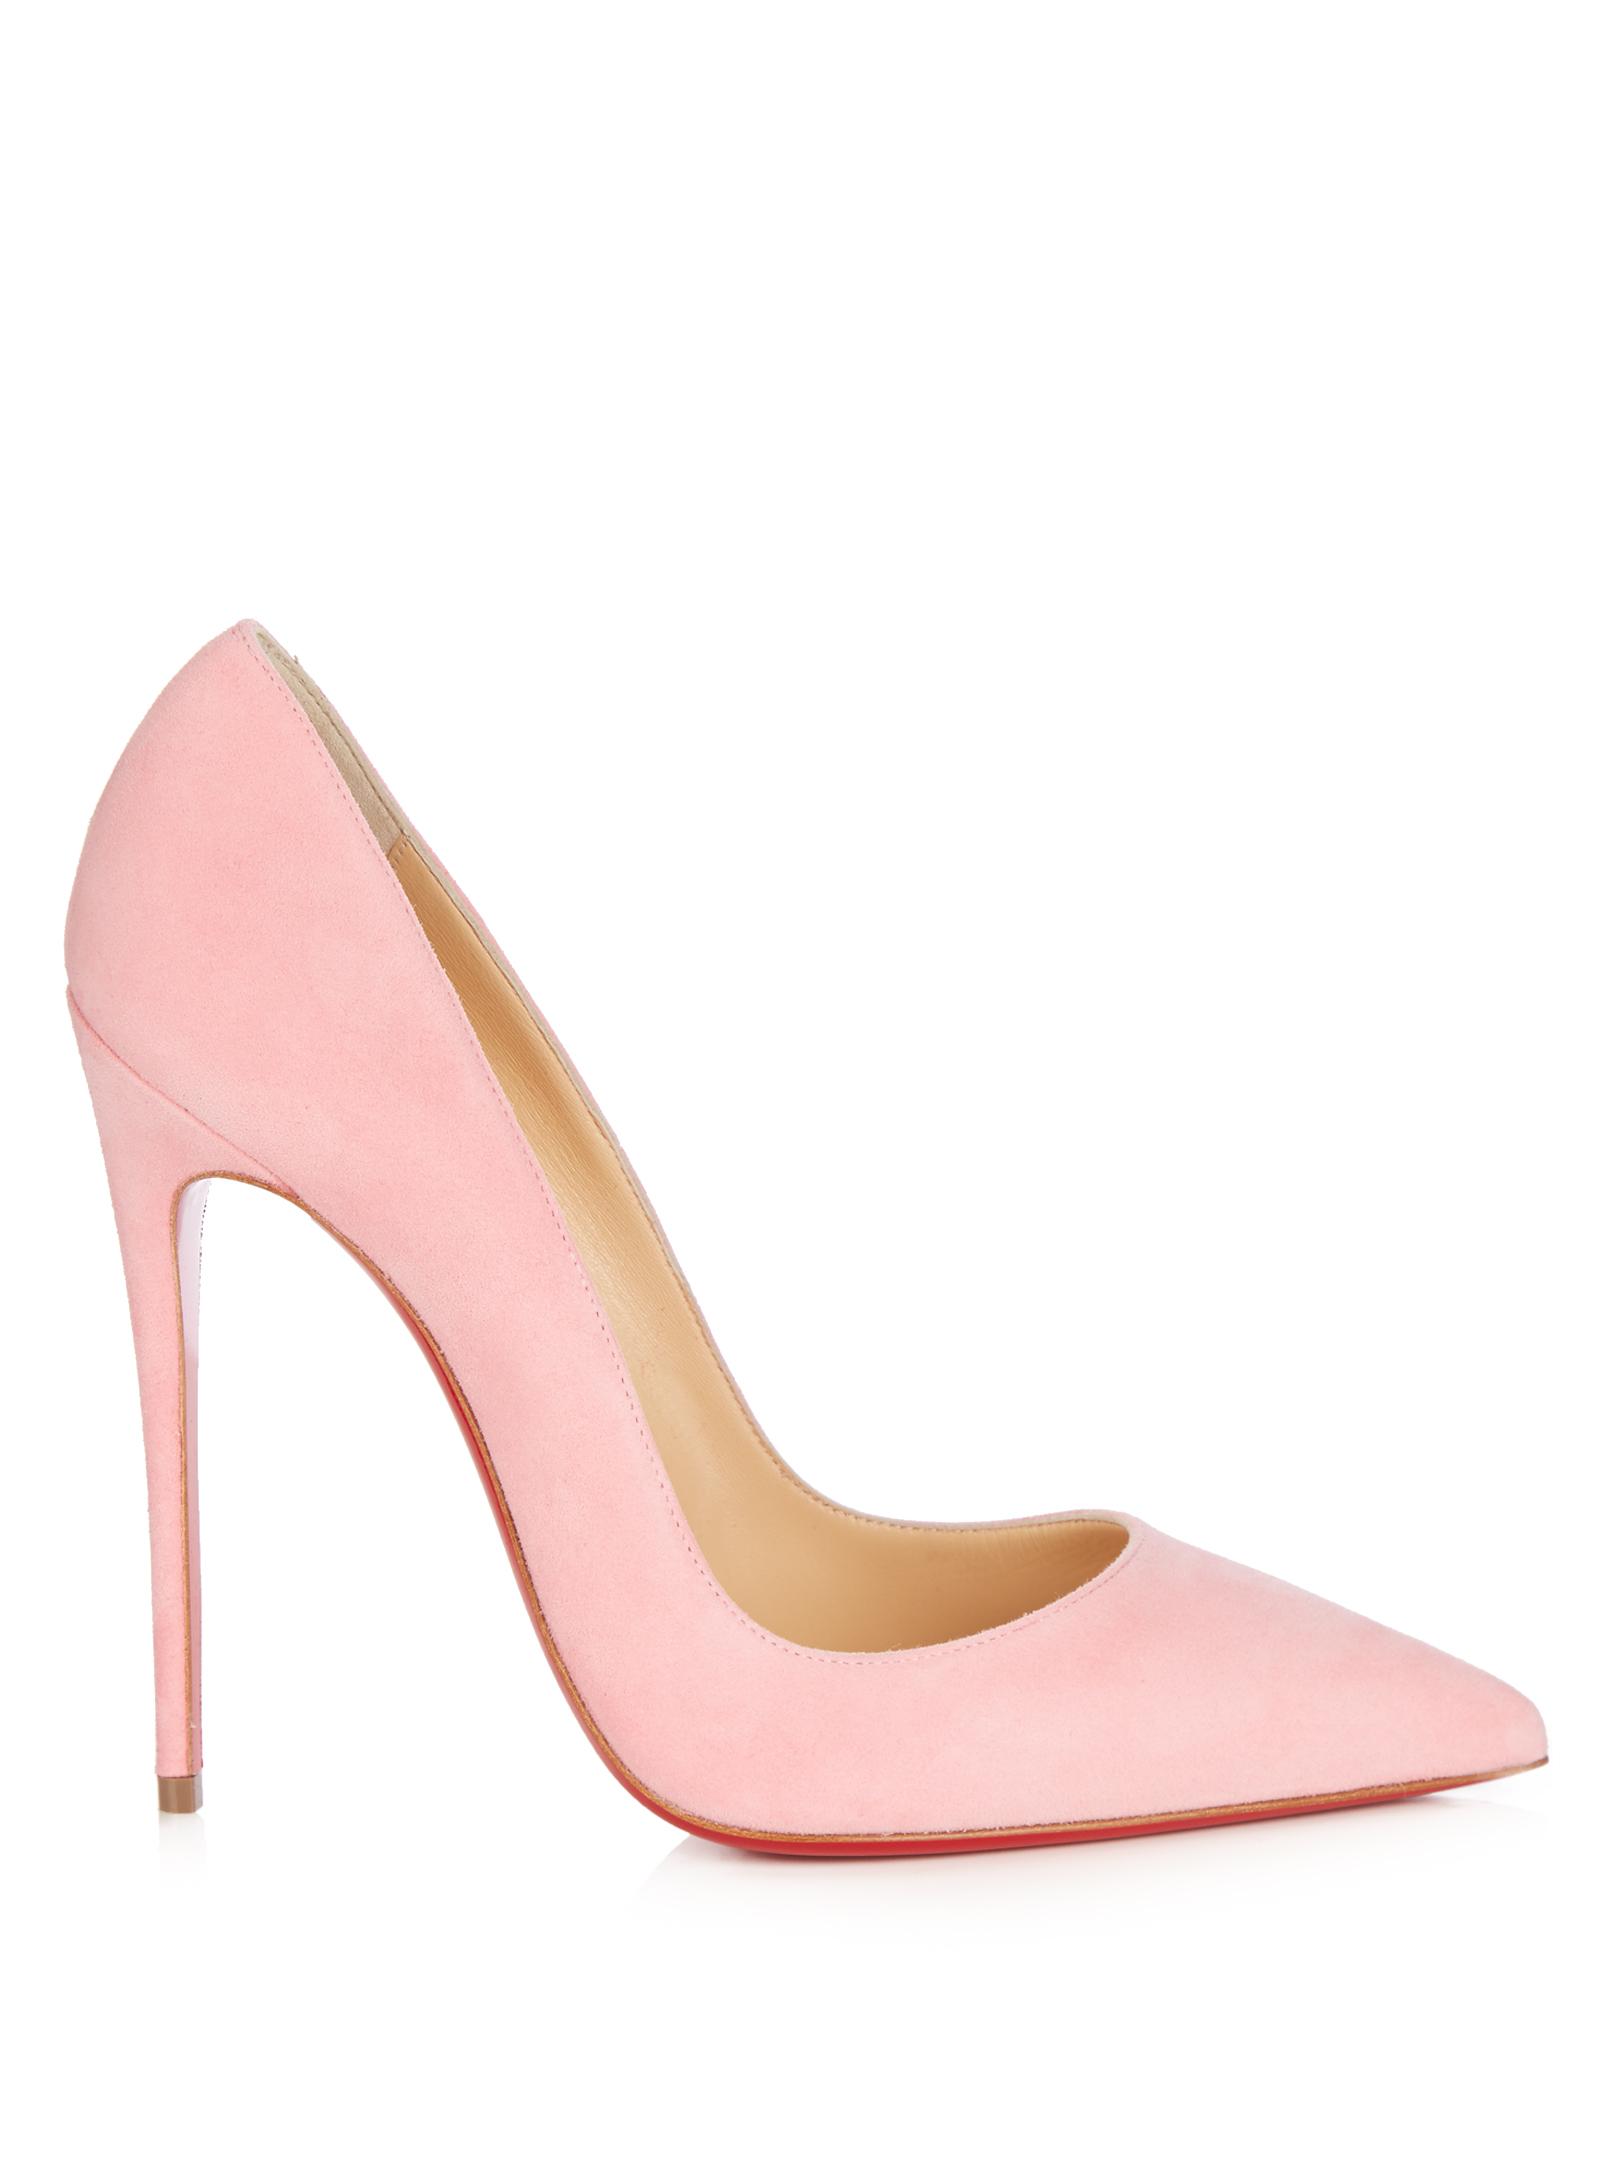 Christian Louboutin So Kate suede 120mm Pumps in Pink | Lyst